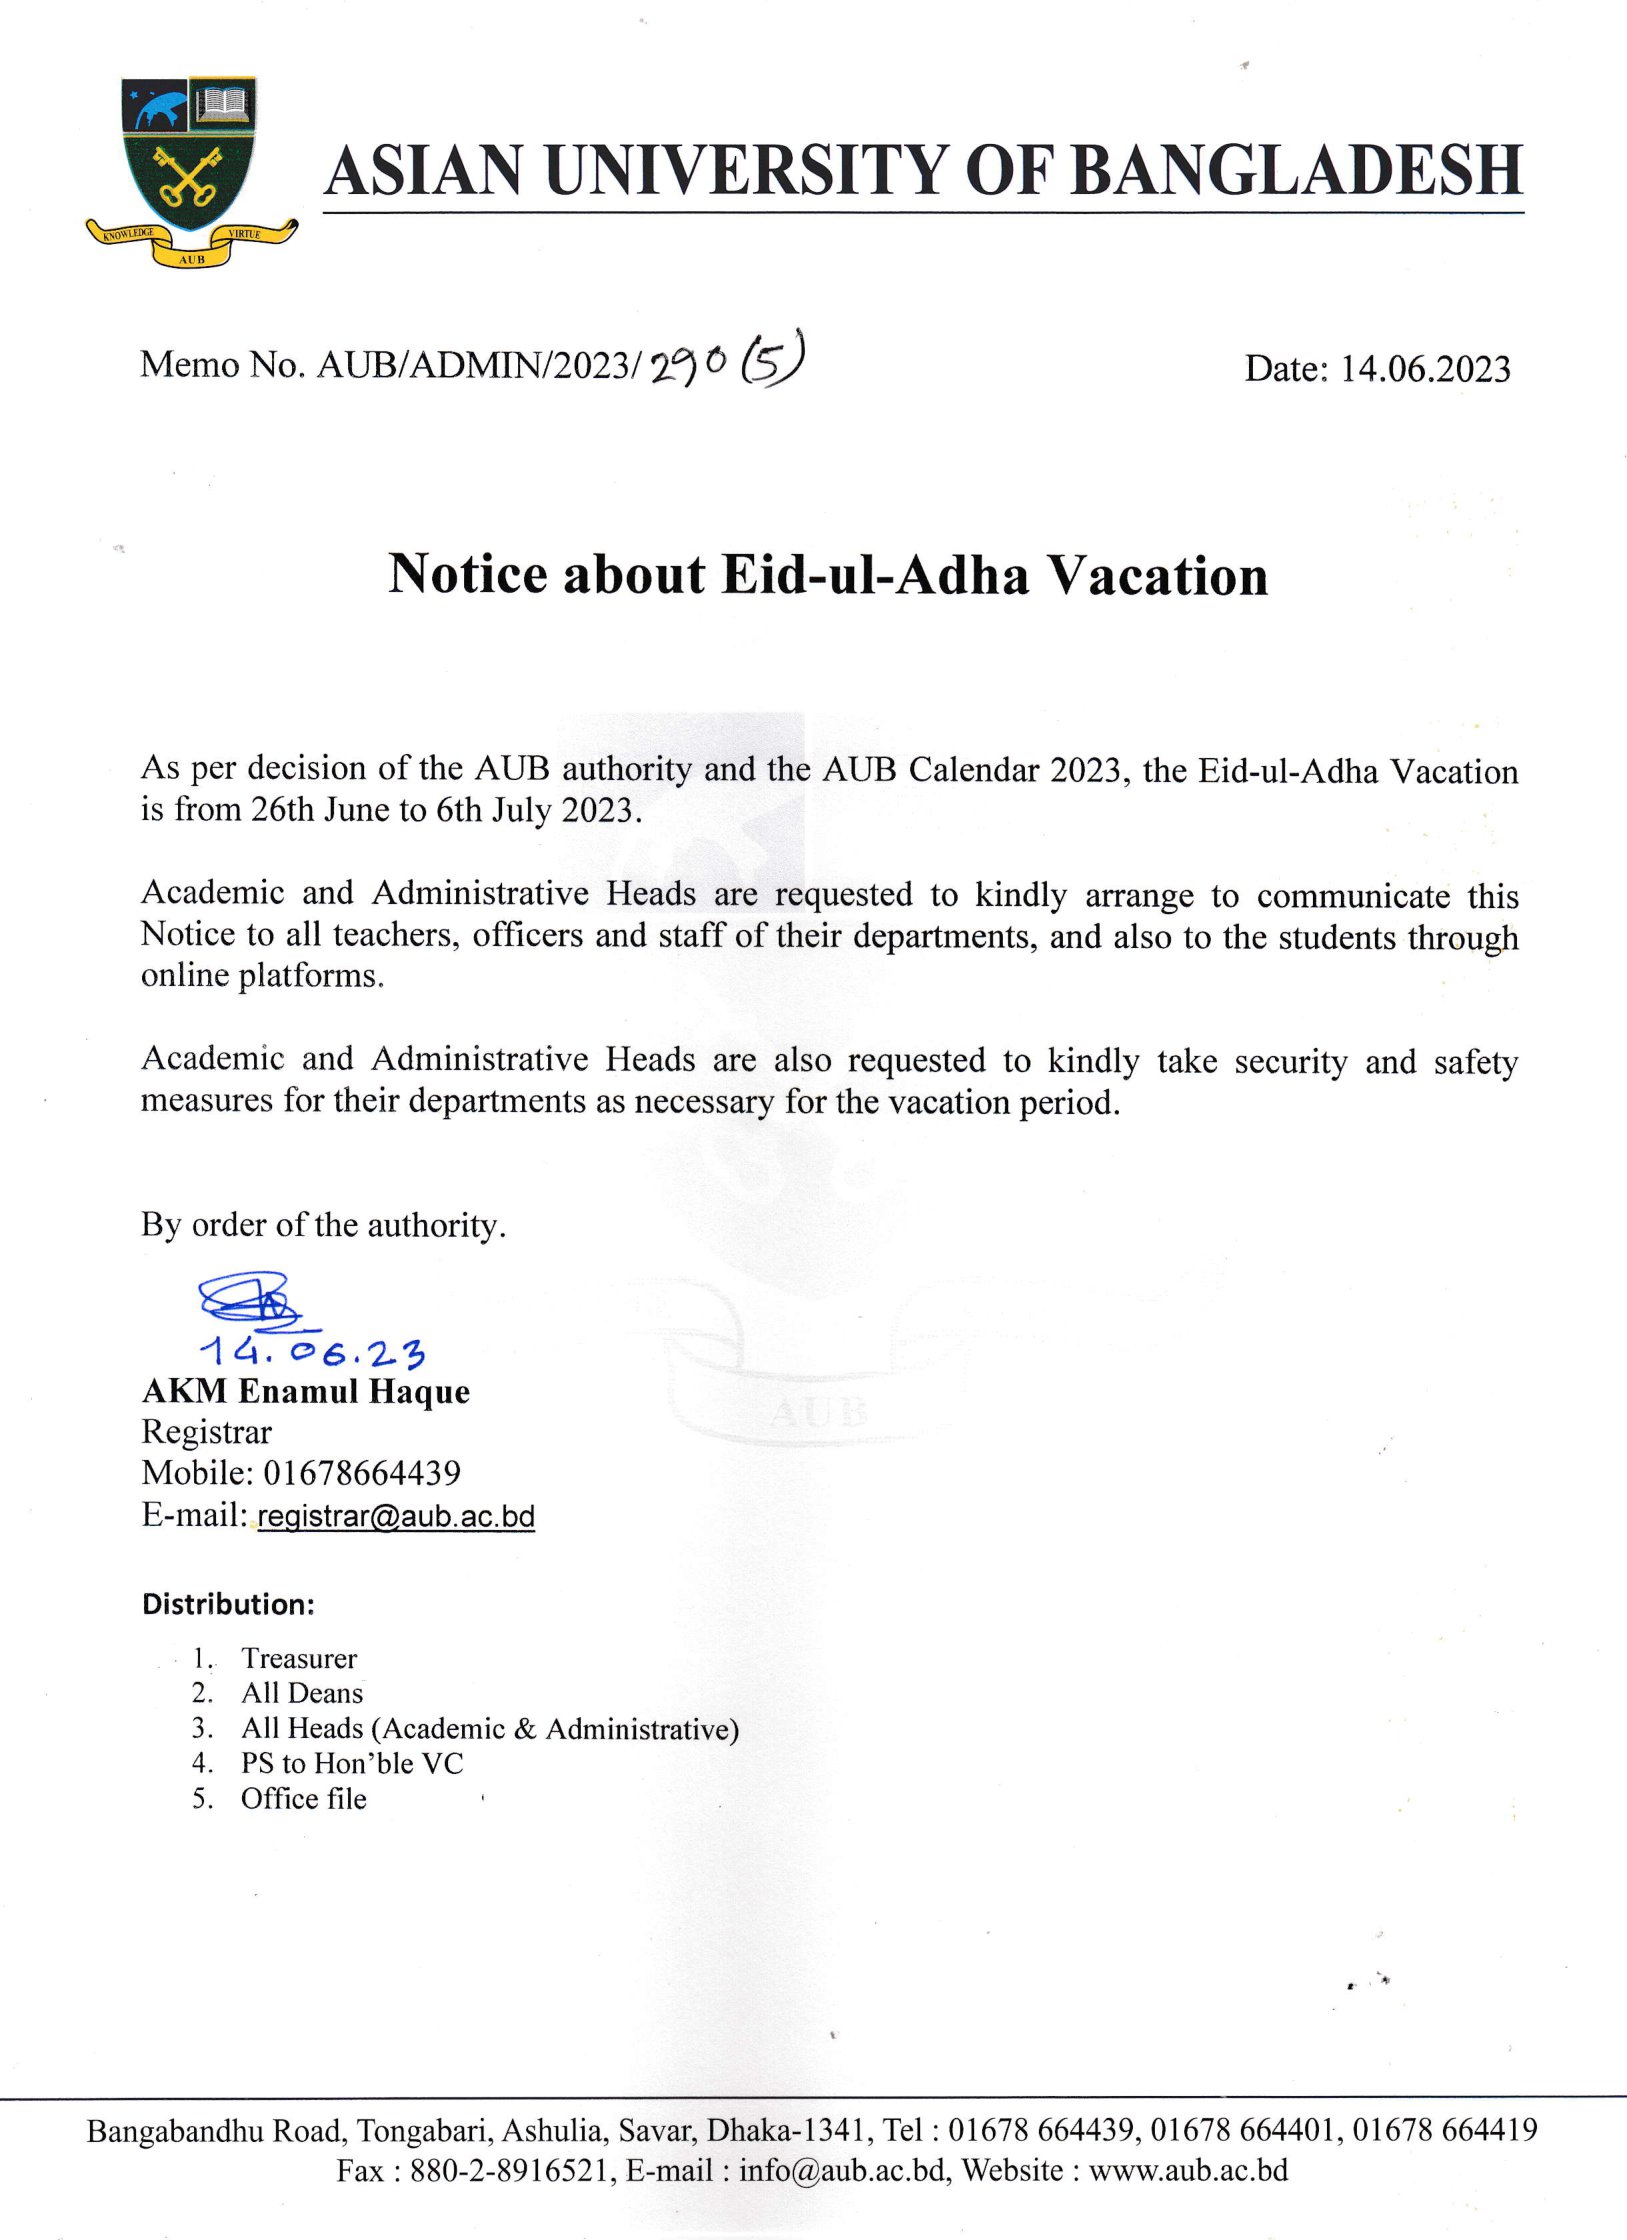 Notice about Eid-ul-Adha 2023 vacation